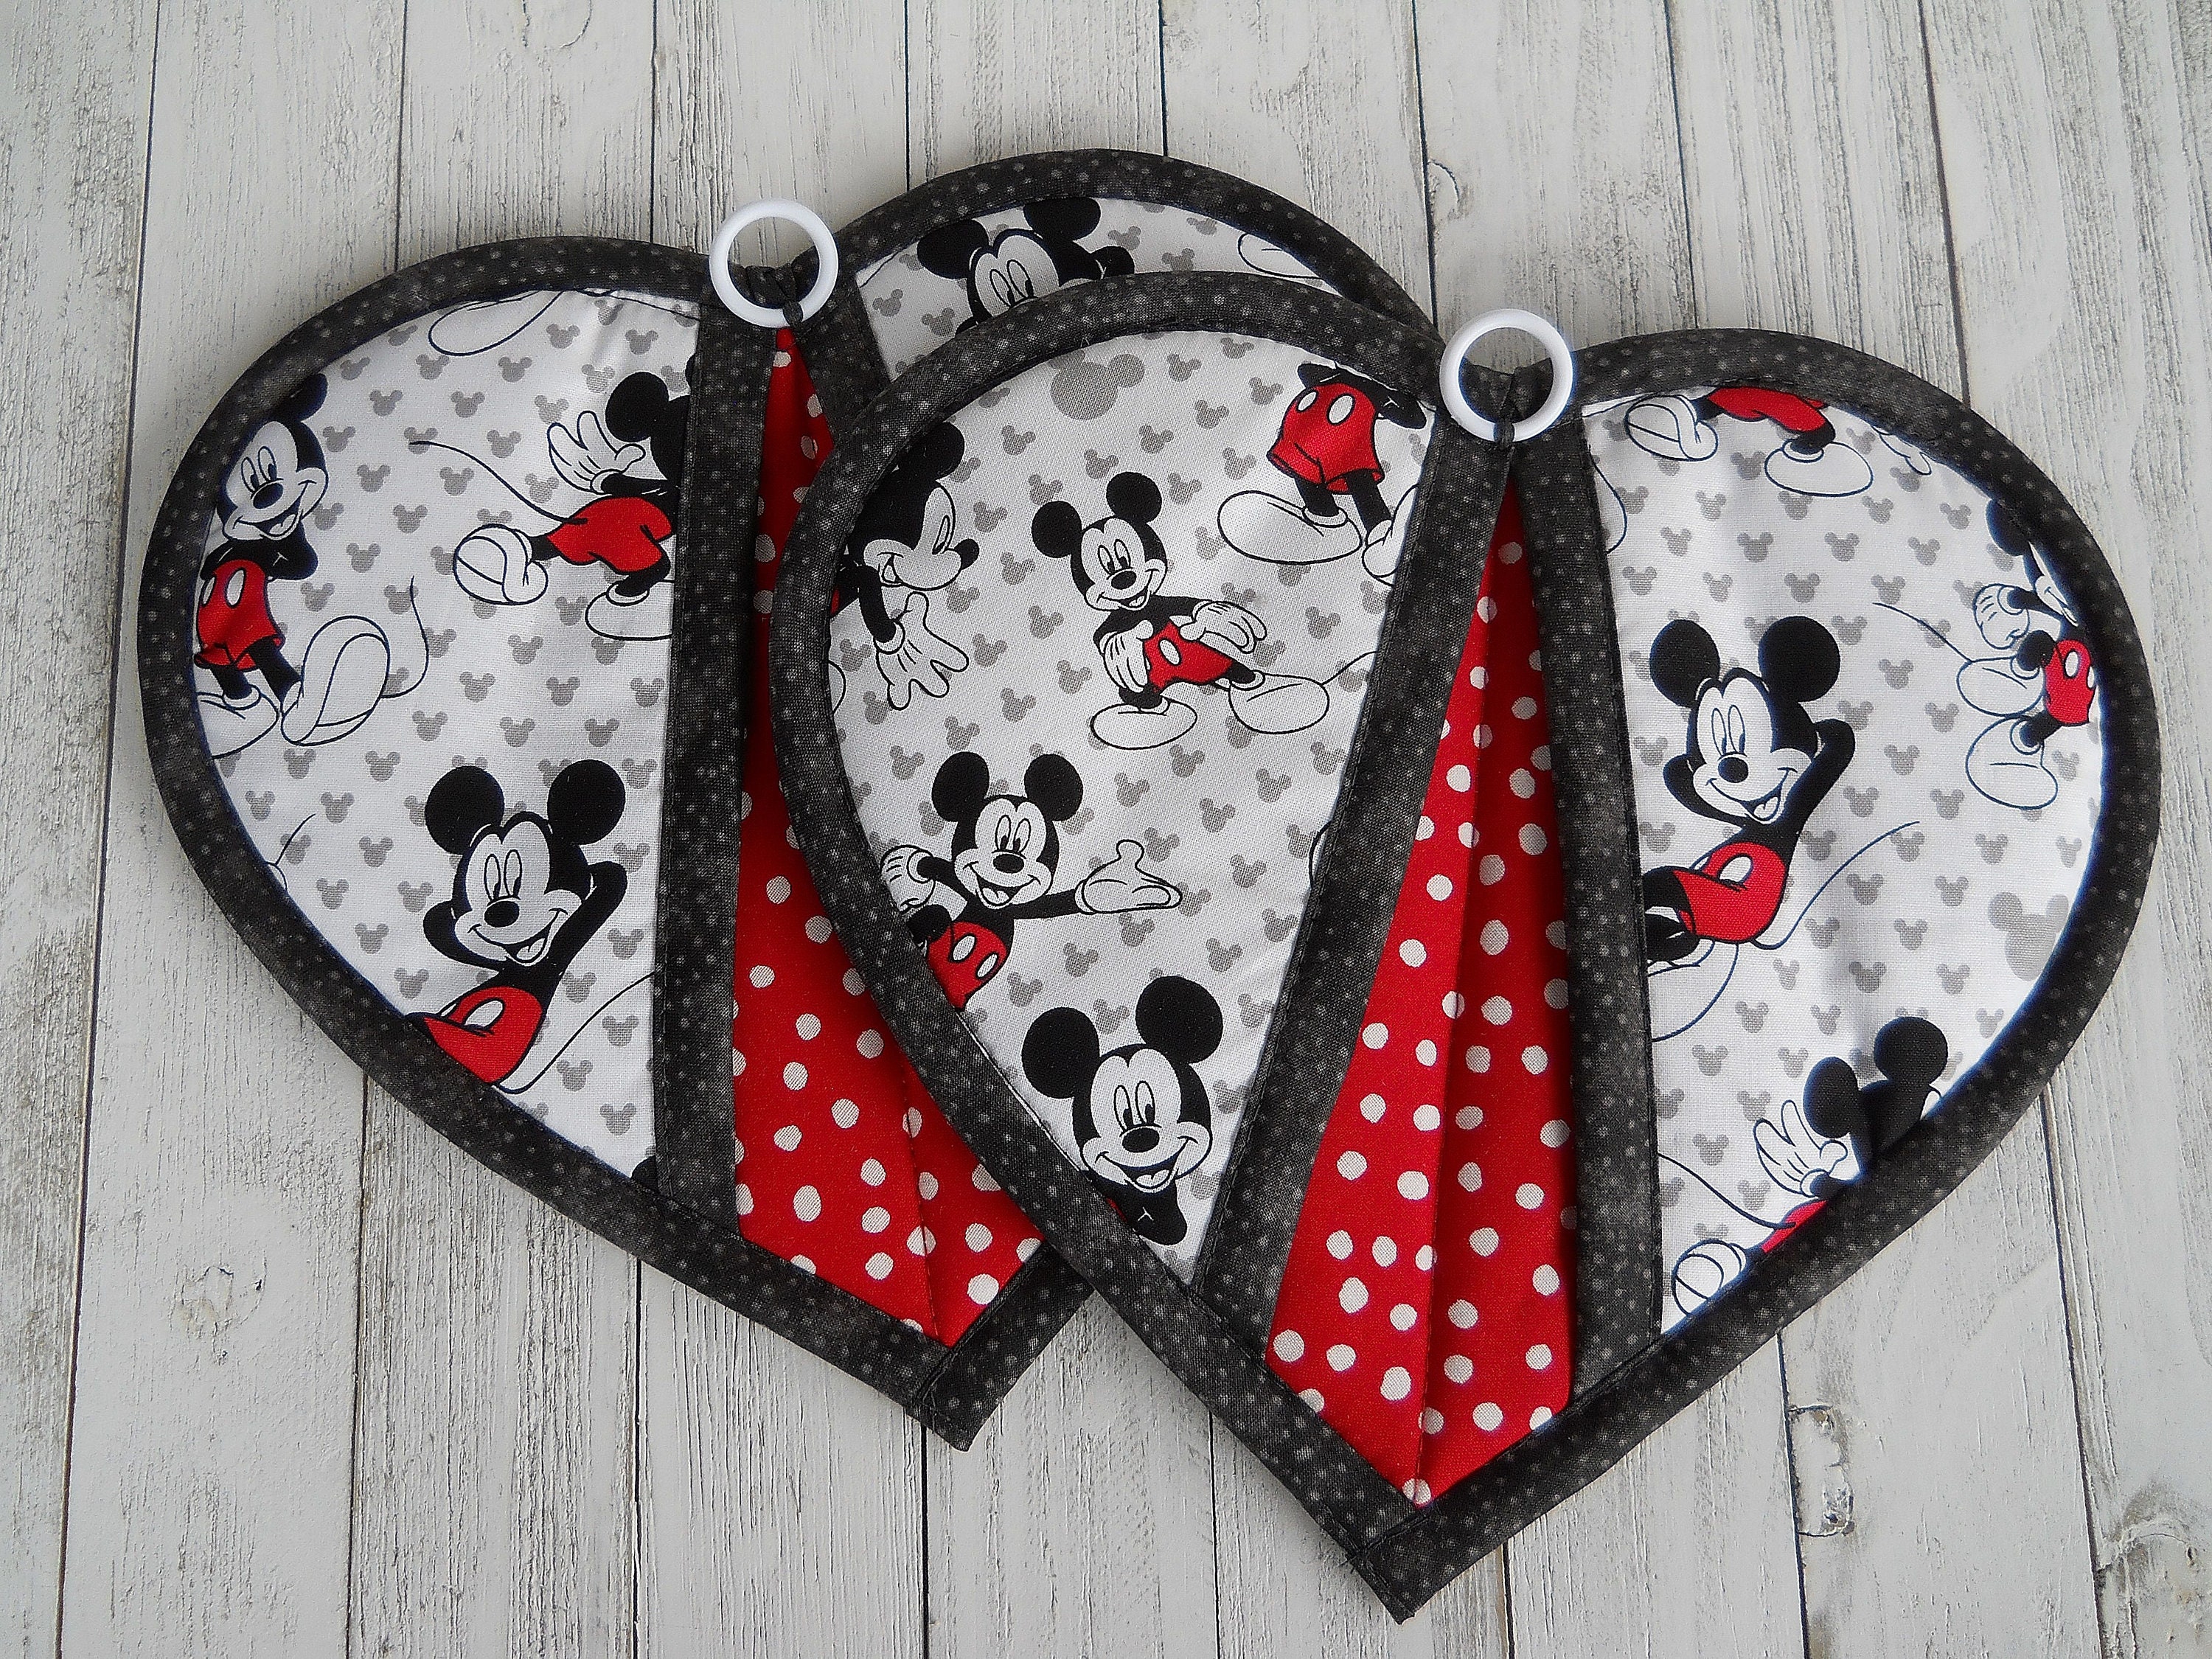 Handmade Pot Holders Trivets Hotpads, Set of 2: Christmas Kitty Cat Heart  Oven Mitts, Quilted Potholders With Pockets, Holiday Gift 